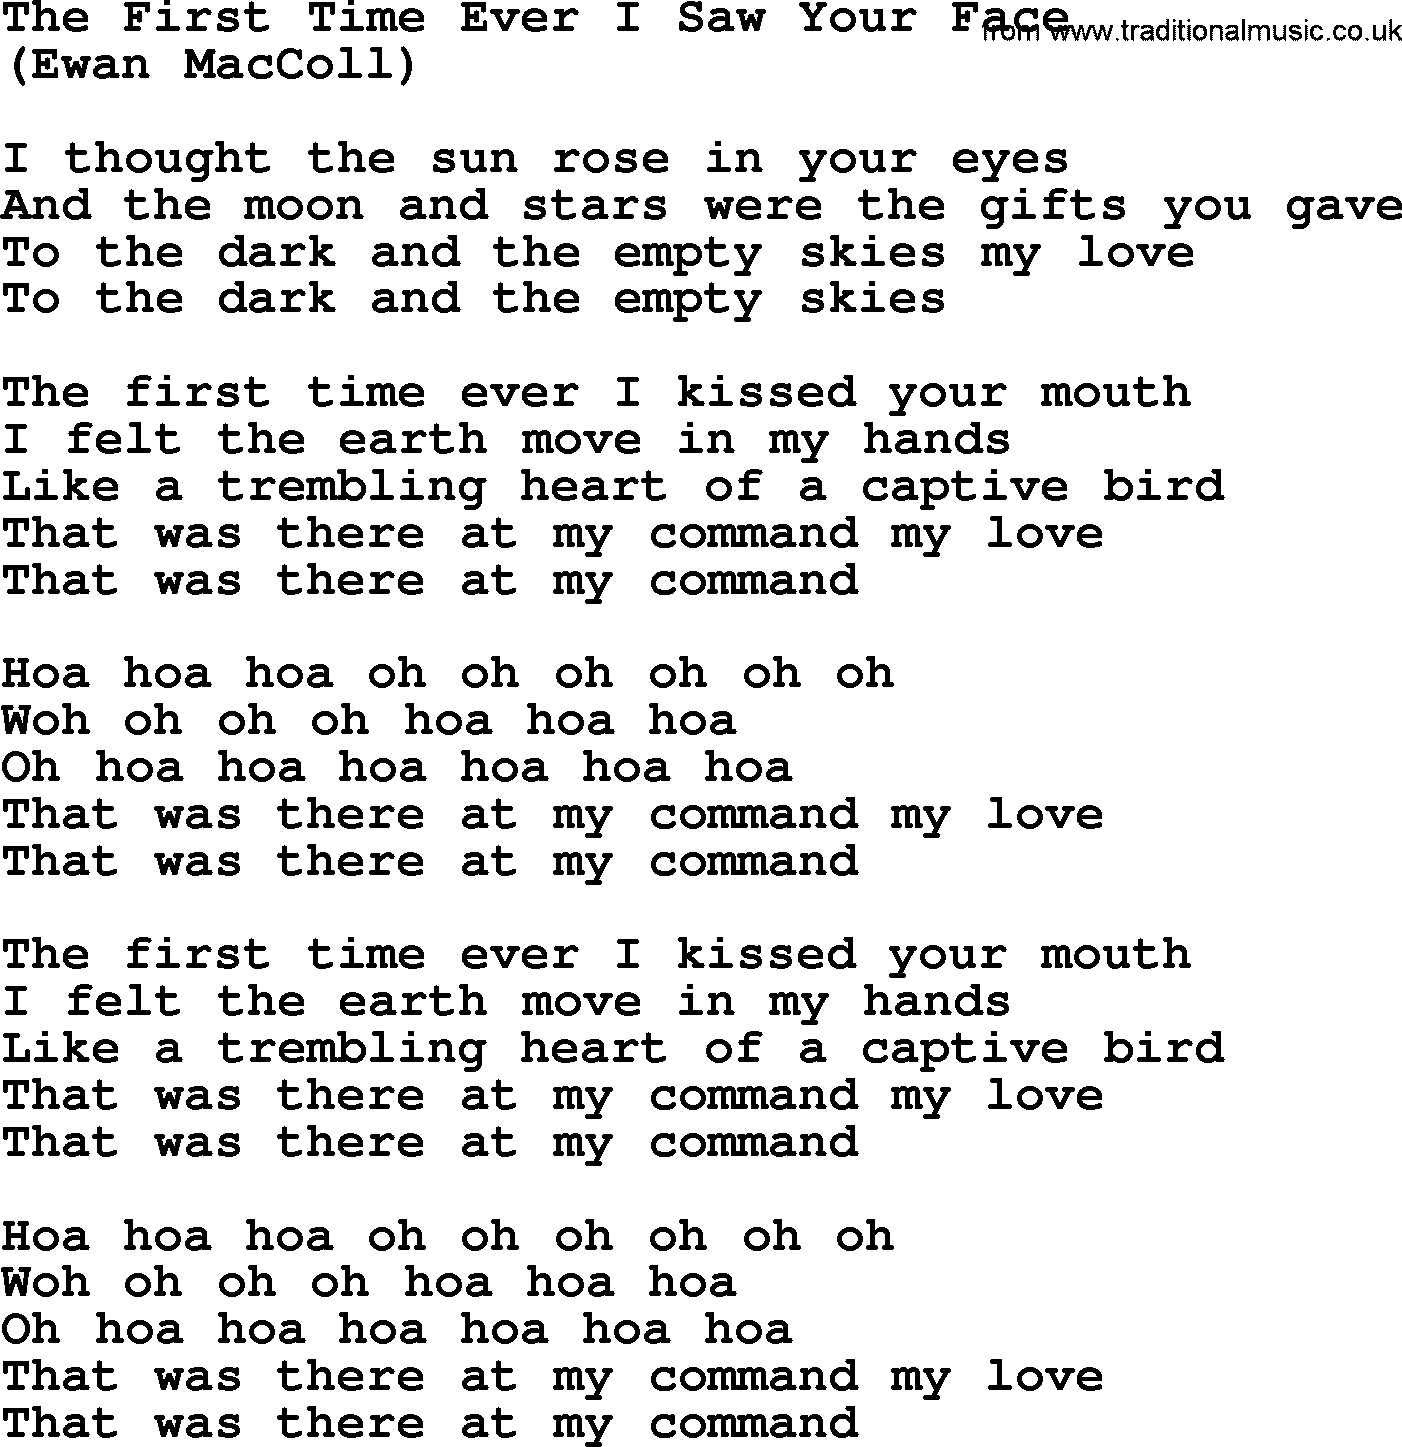 The Byrds song The First Time Ever I Saw Your Face, lyrics